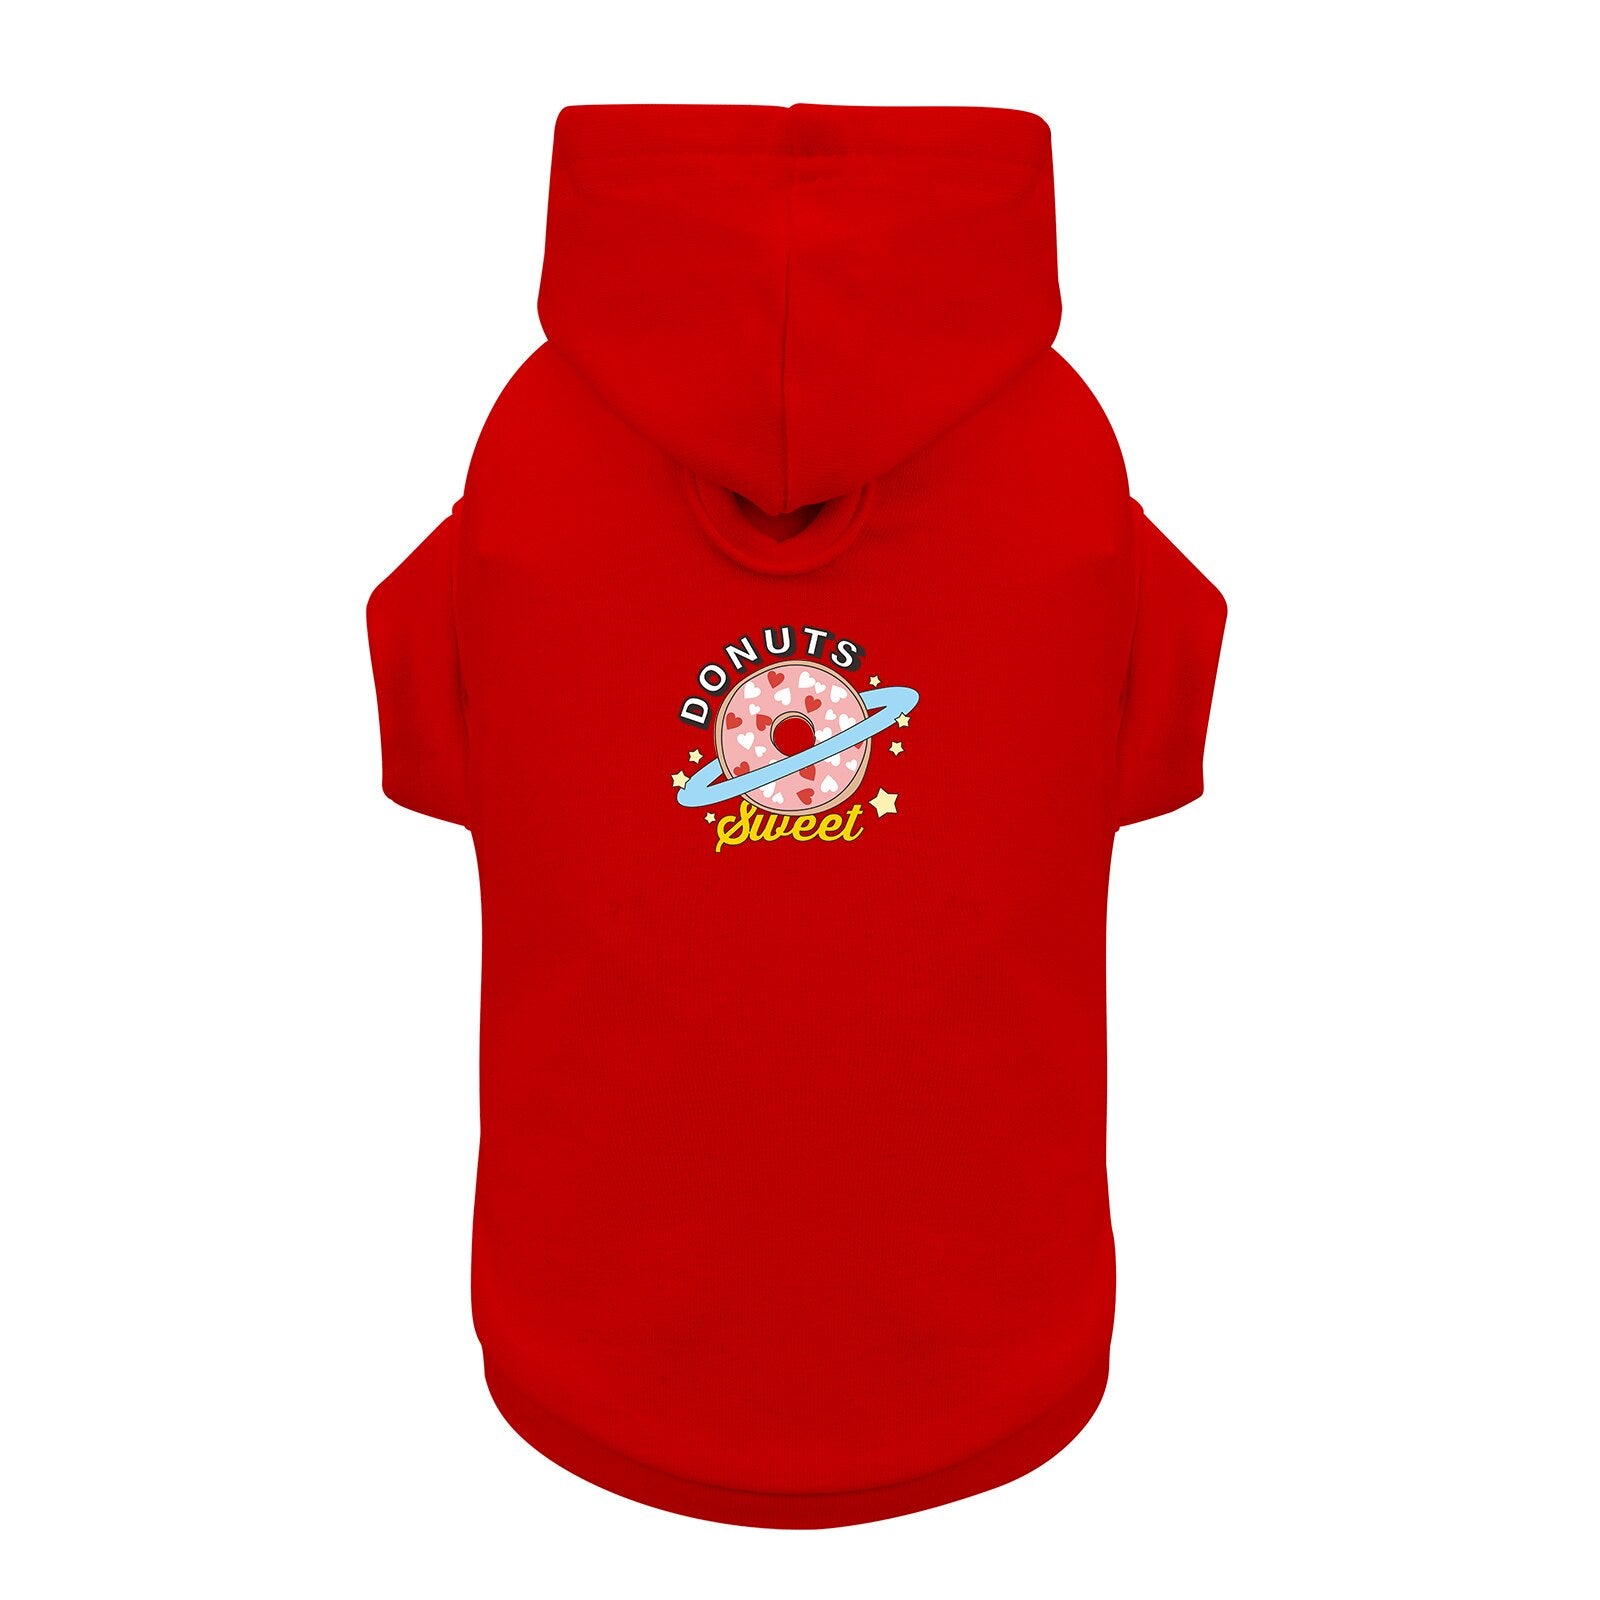 Pattern Printed Stripe Pet Hoodies White and Red, Leash Hole Under the Hood, Cotton Fabric Autumn Winter to Keep Warm